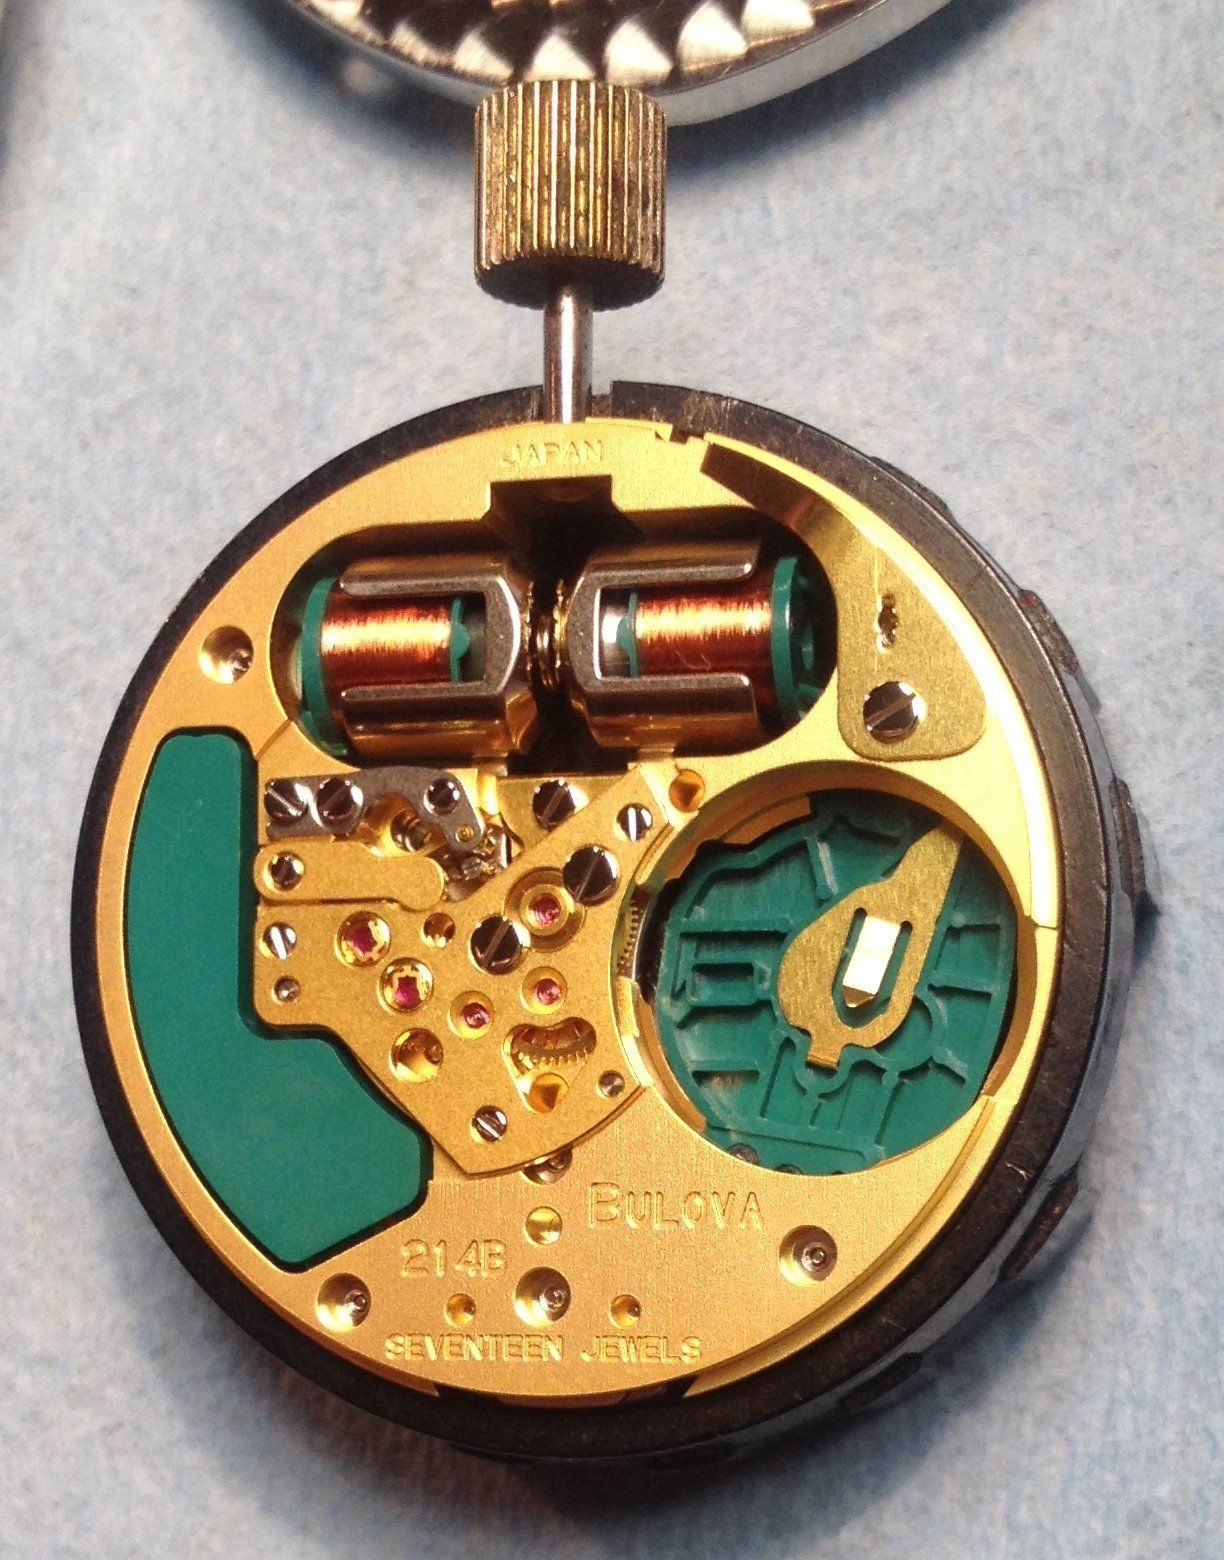 Accutron 50th anniversary spaceview  movement back Budget Accutron Service